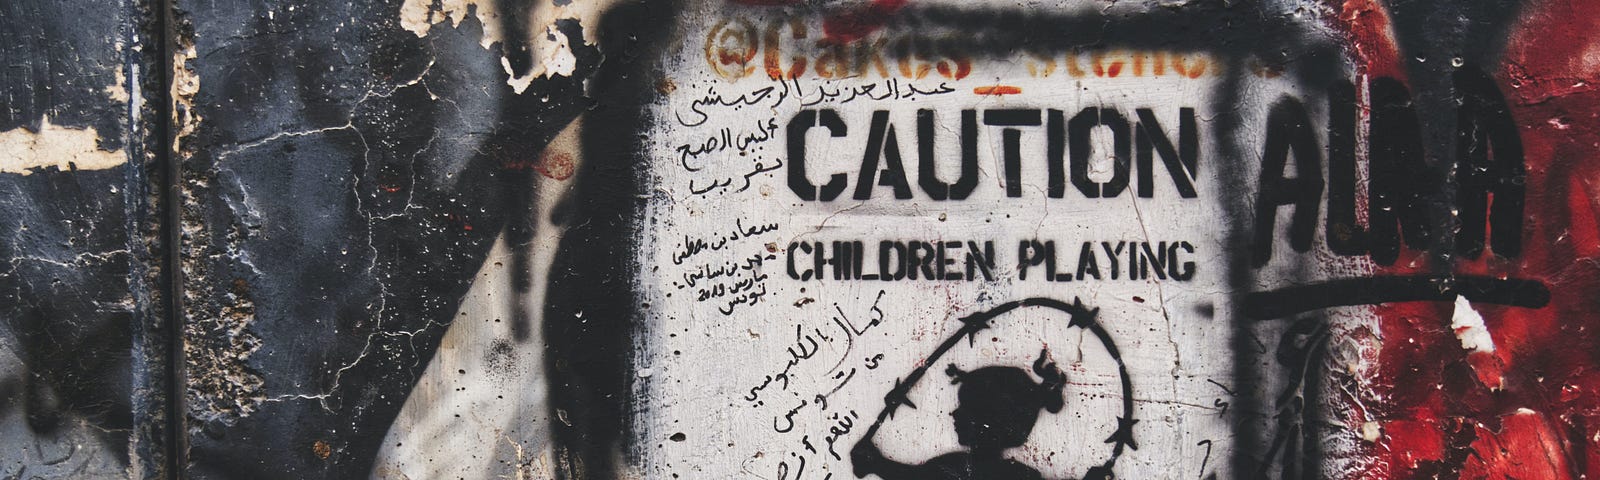 graffitti on a wall that says “caution children playing with barbed wire”